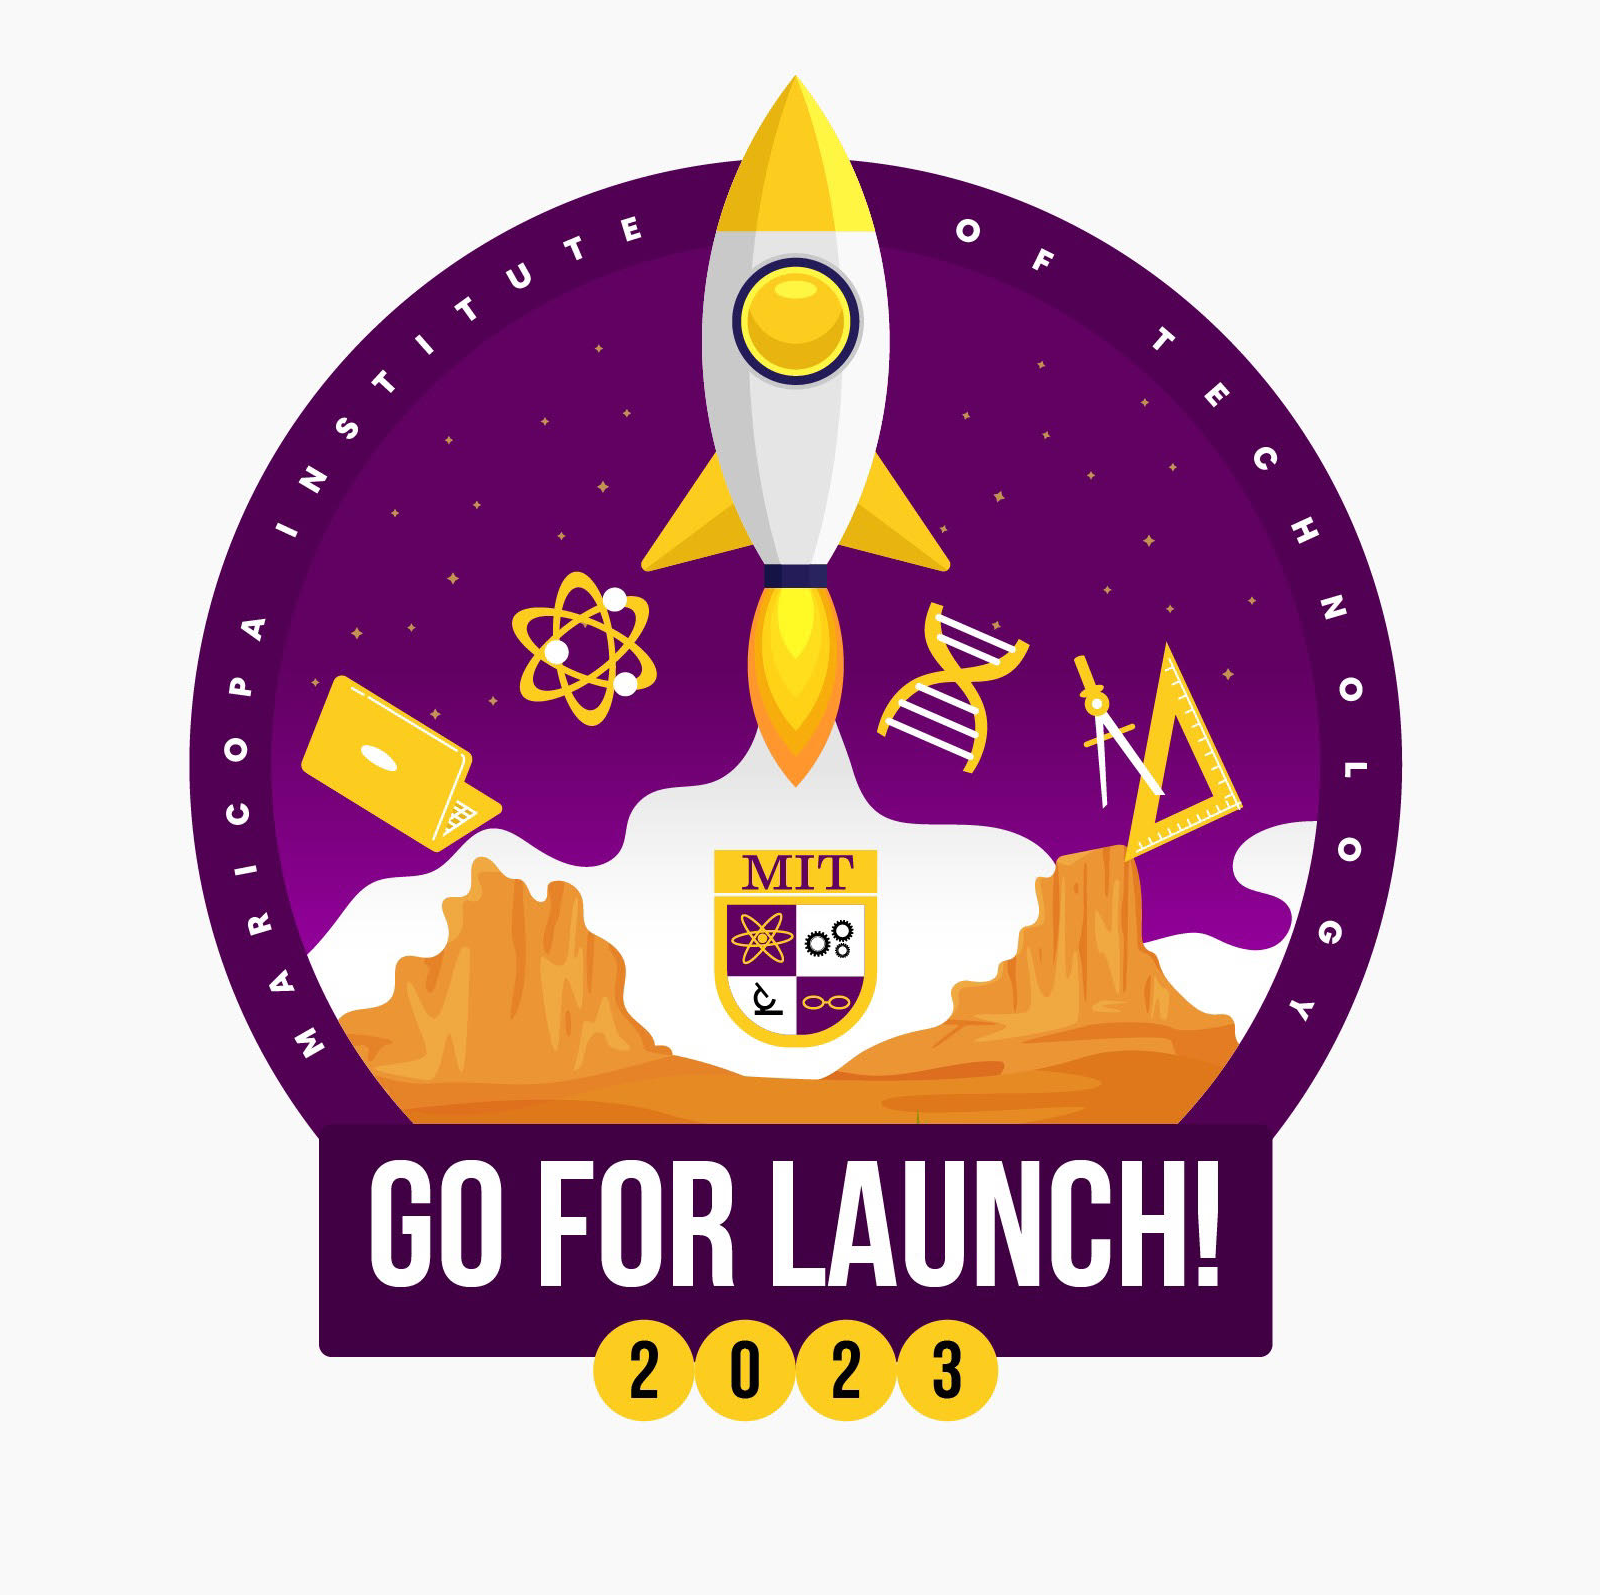 New Go For Launch! Event Manager